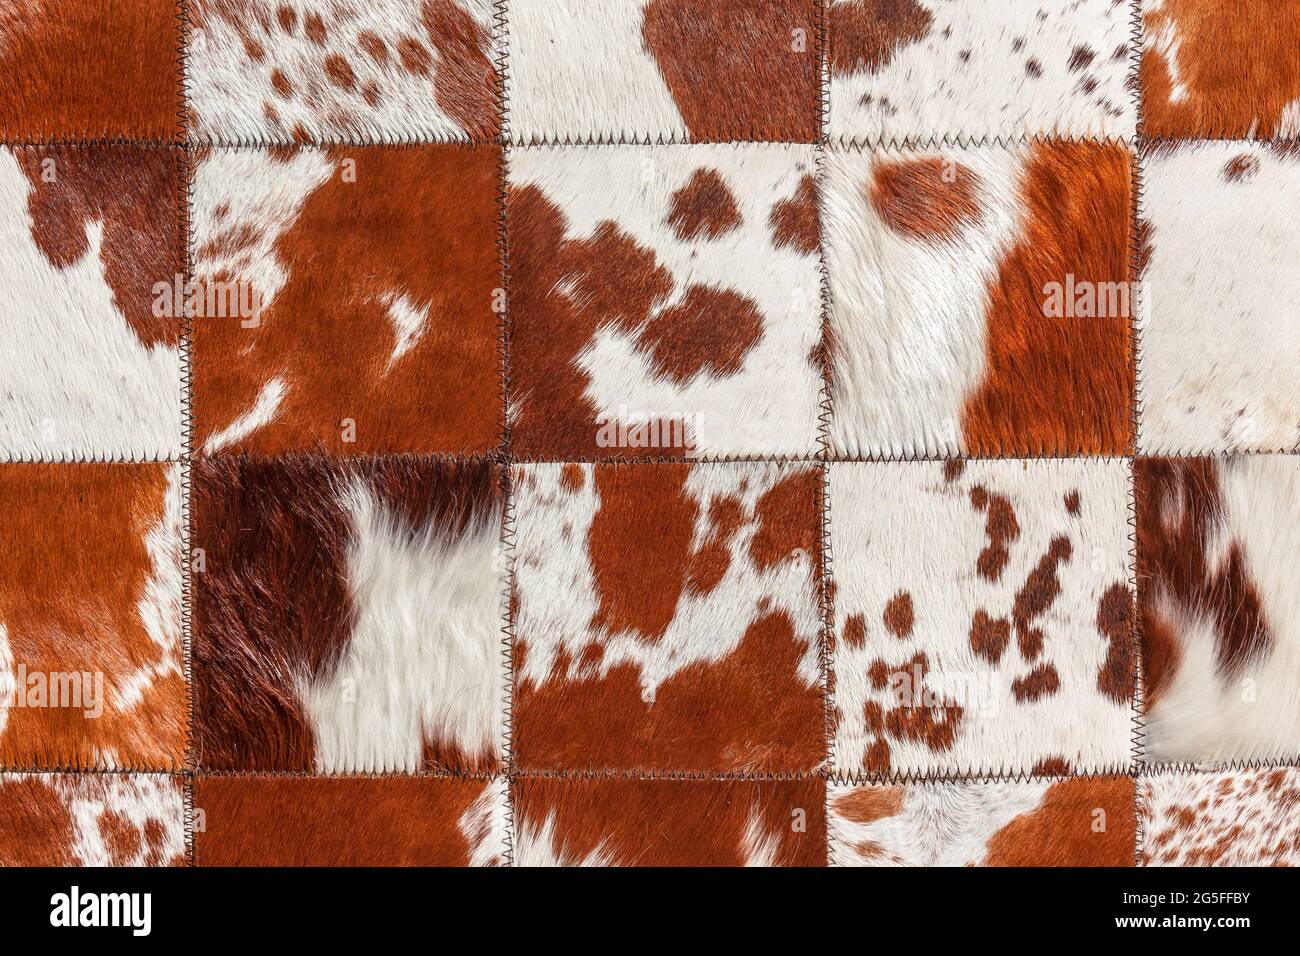 Cattle animal skin hides closeup photo image abstract background detail of  cleaned treated stiched together square blocks to make rug carpet decor l  Stock Photo - Alamy